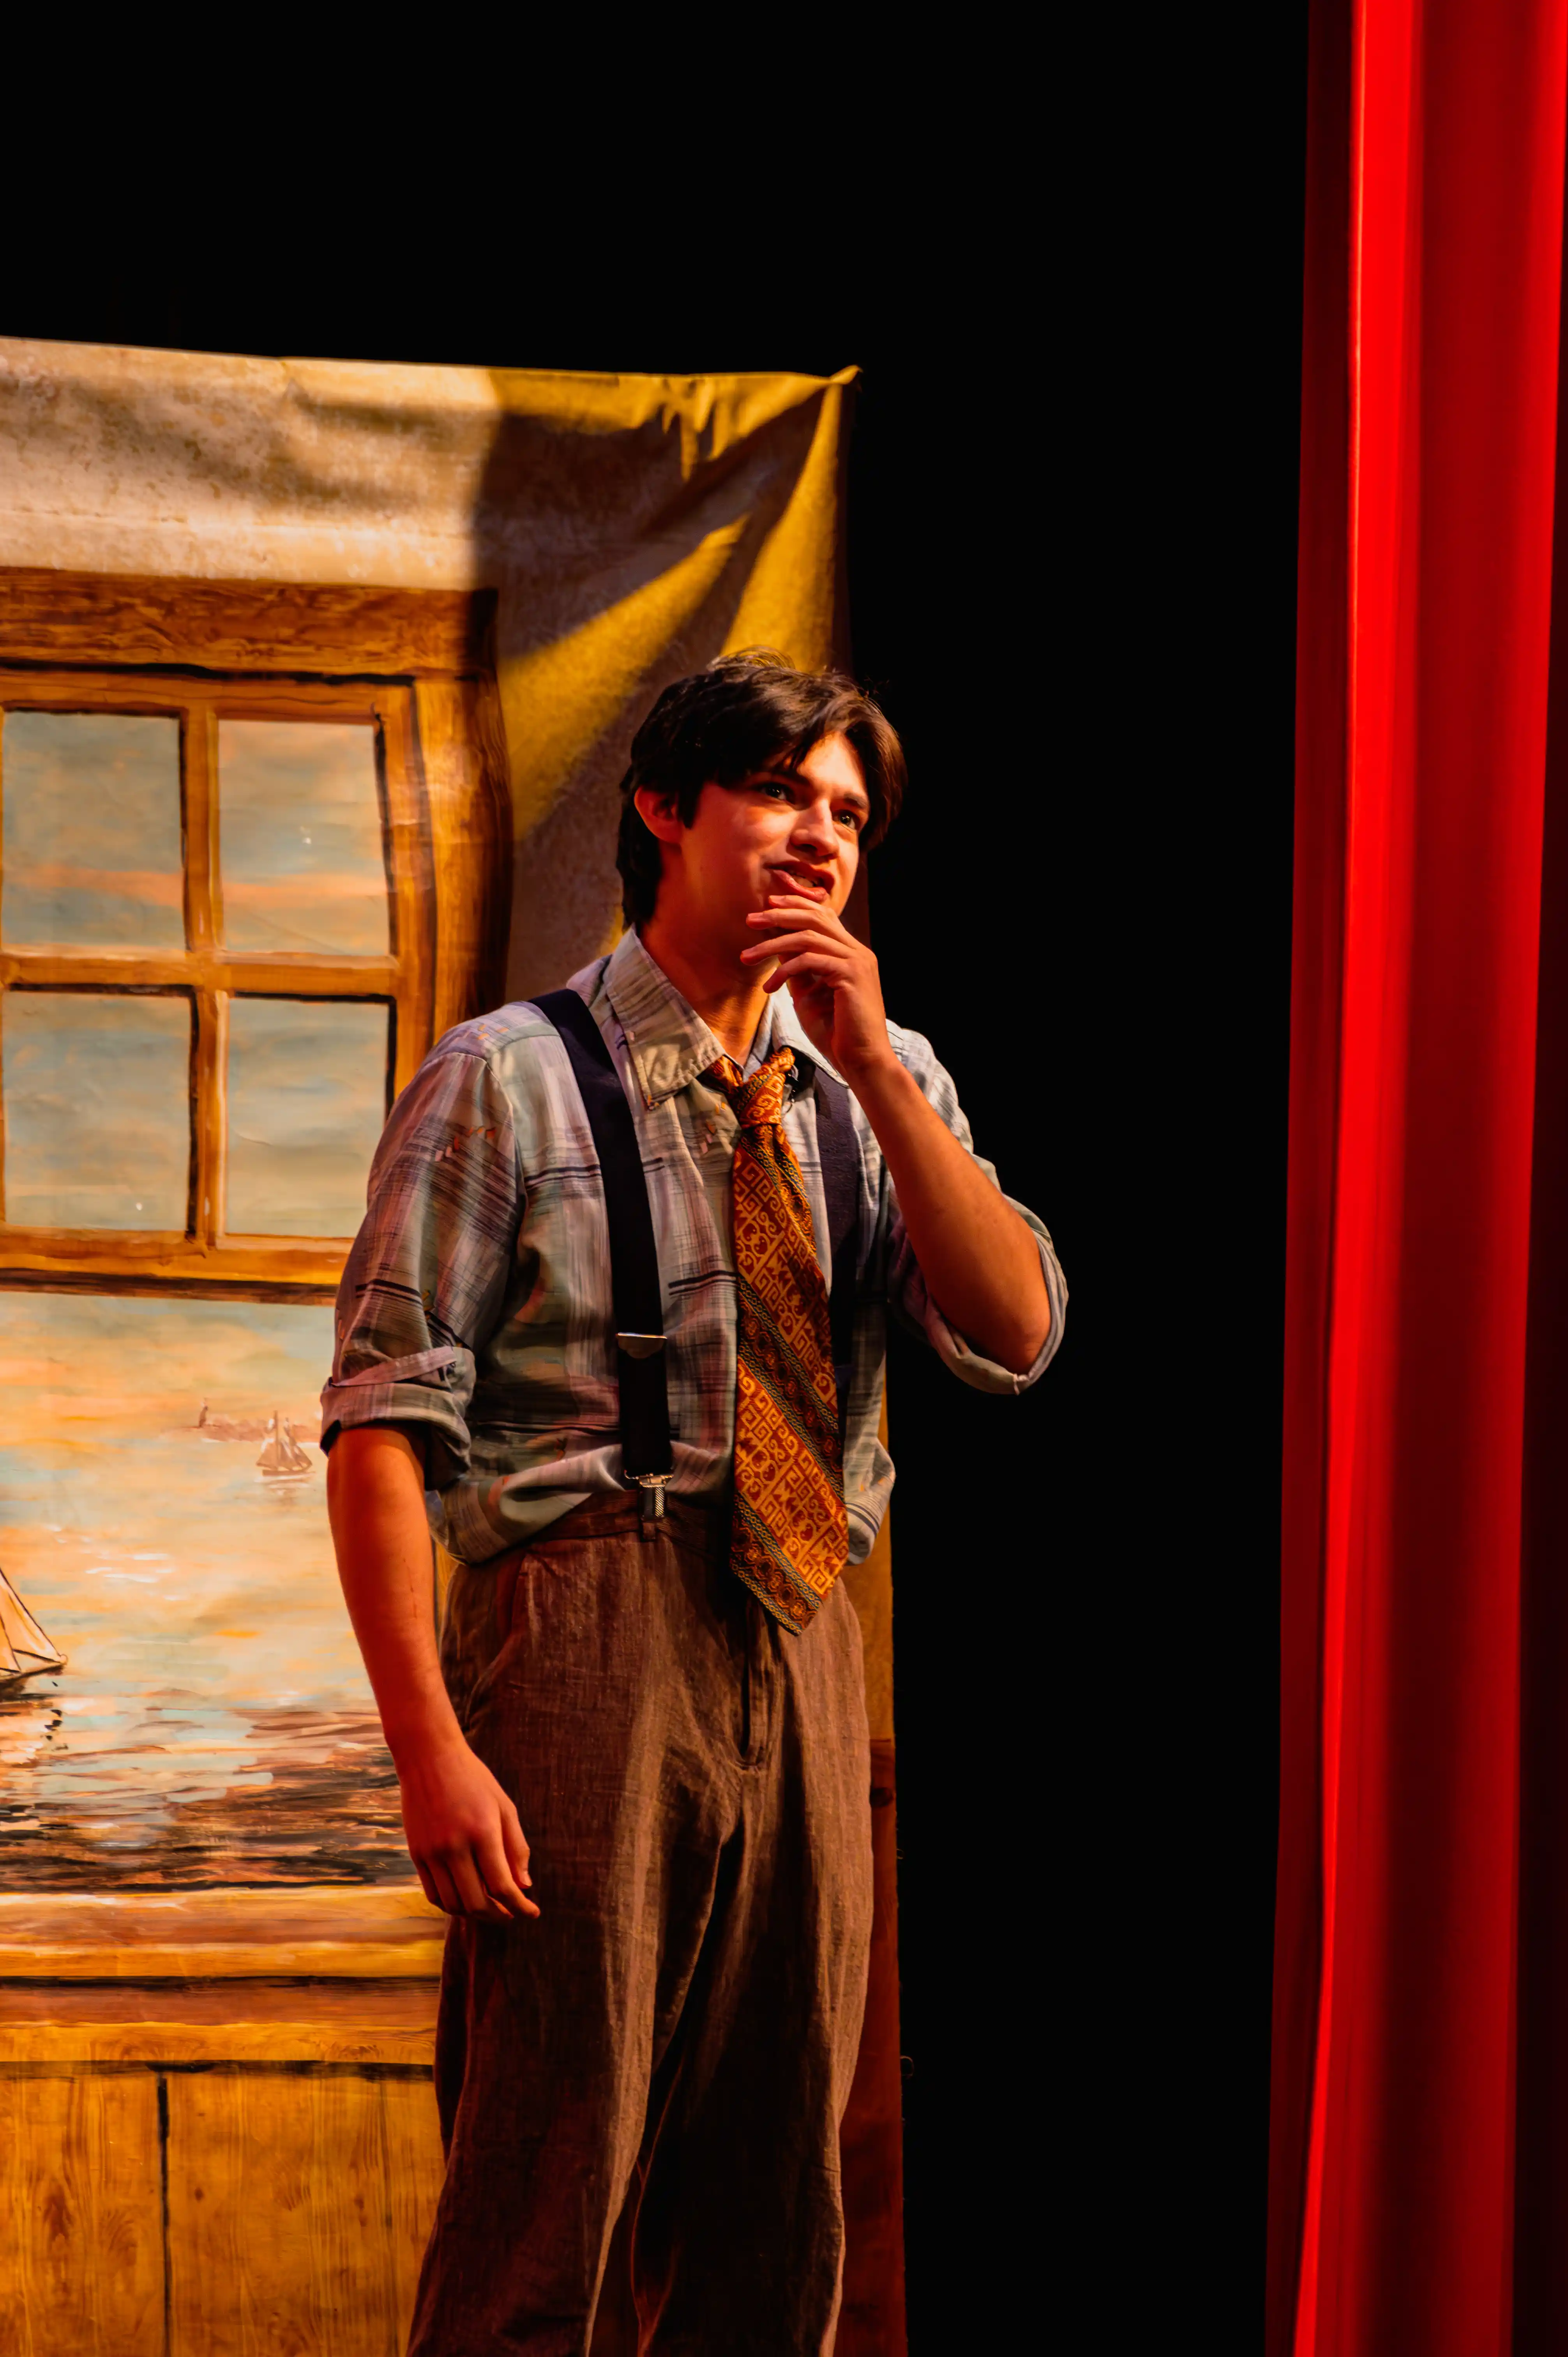 Actor in period costume performing on stage with thoughtful expression, standing beside a painted door backdrop.